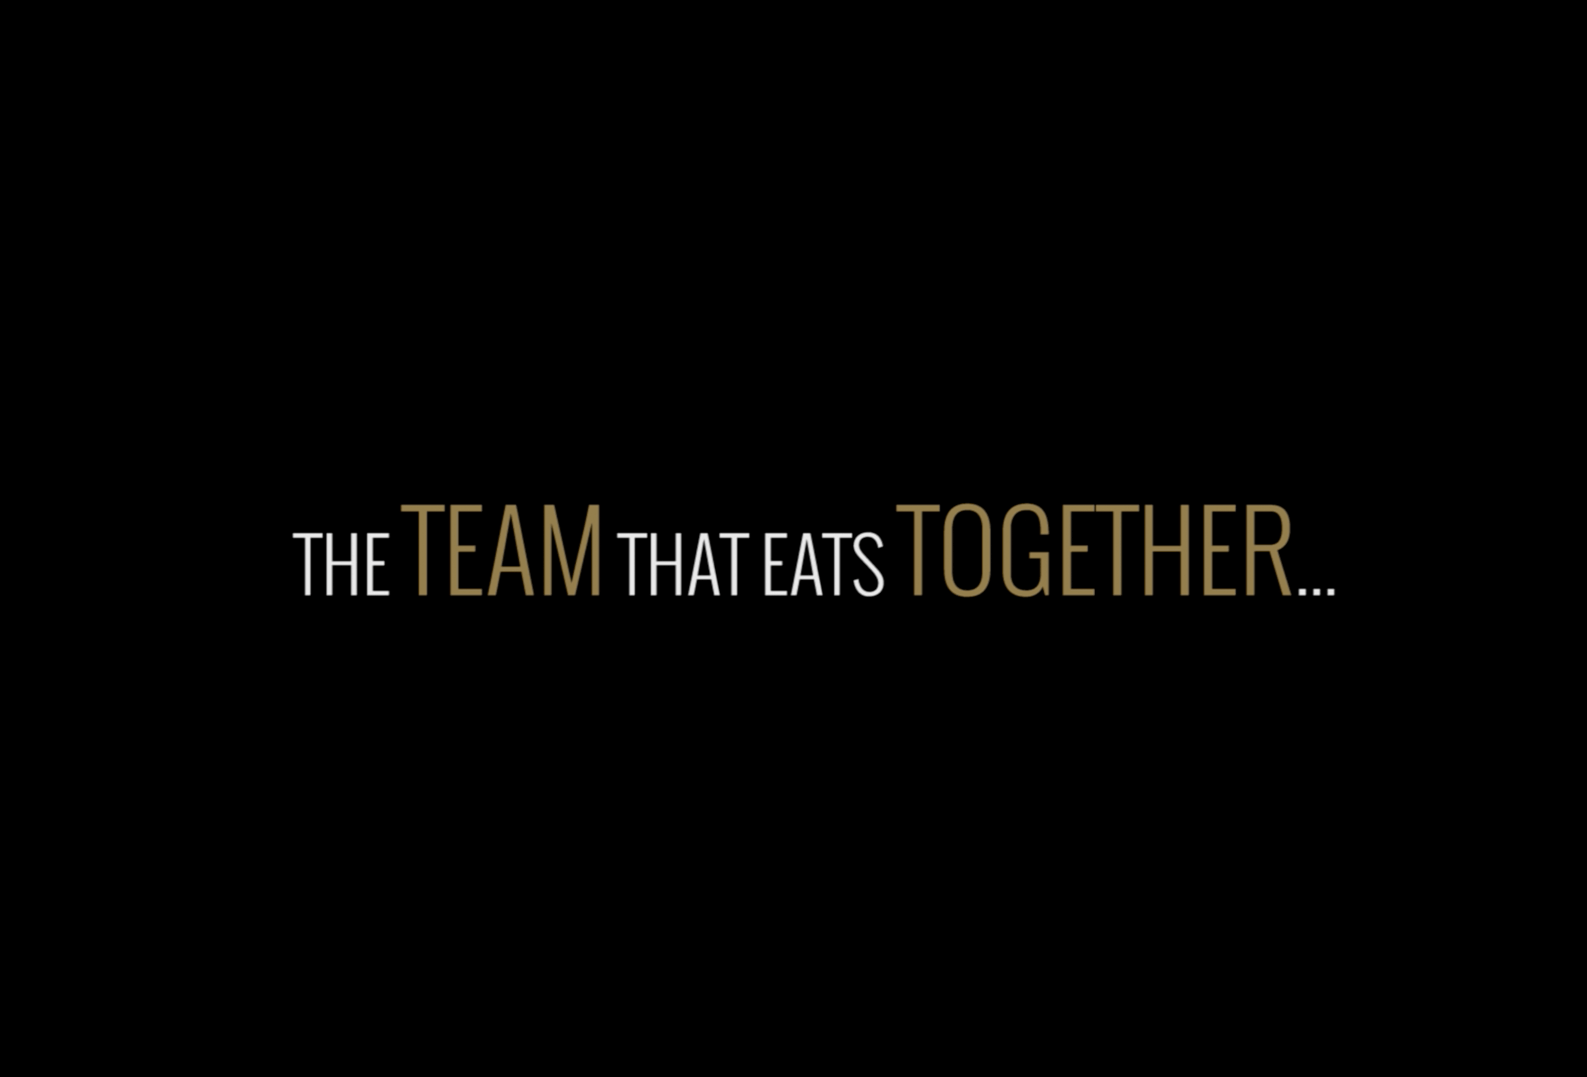 The Team That Eats Together